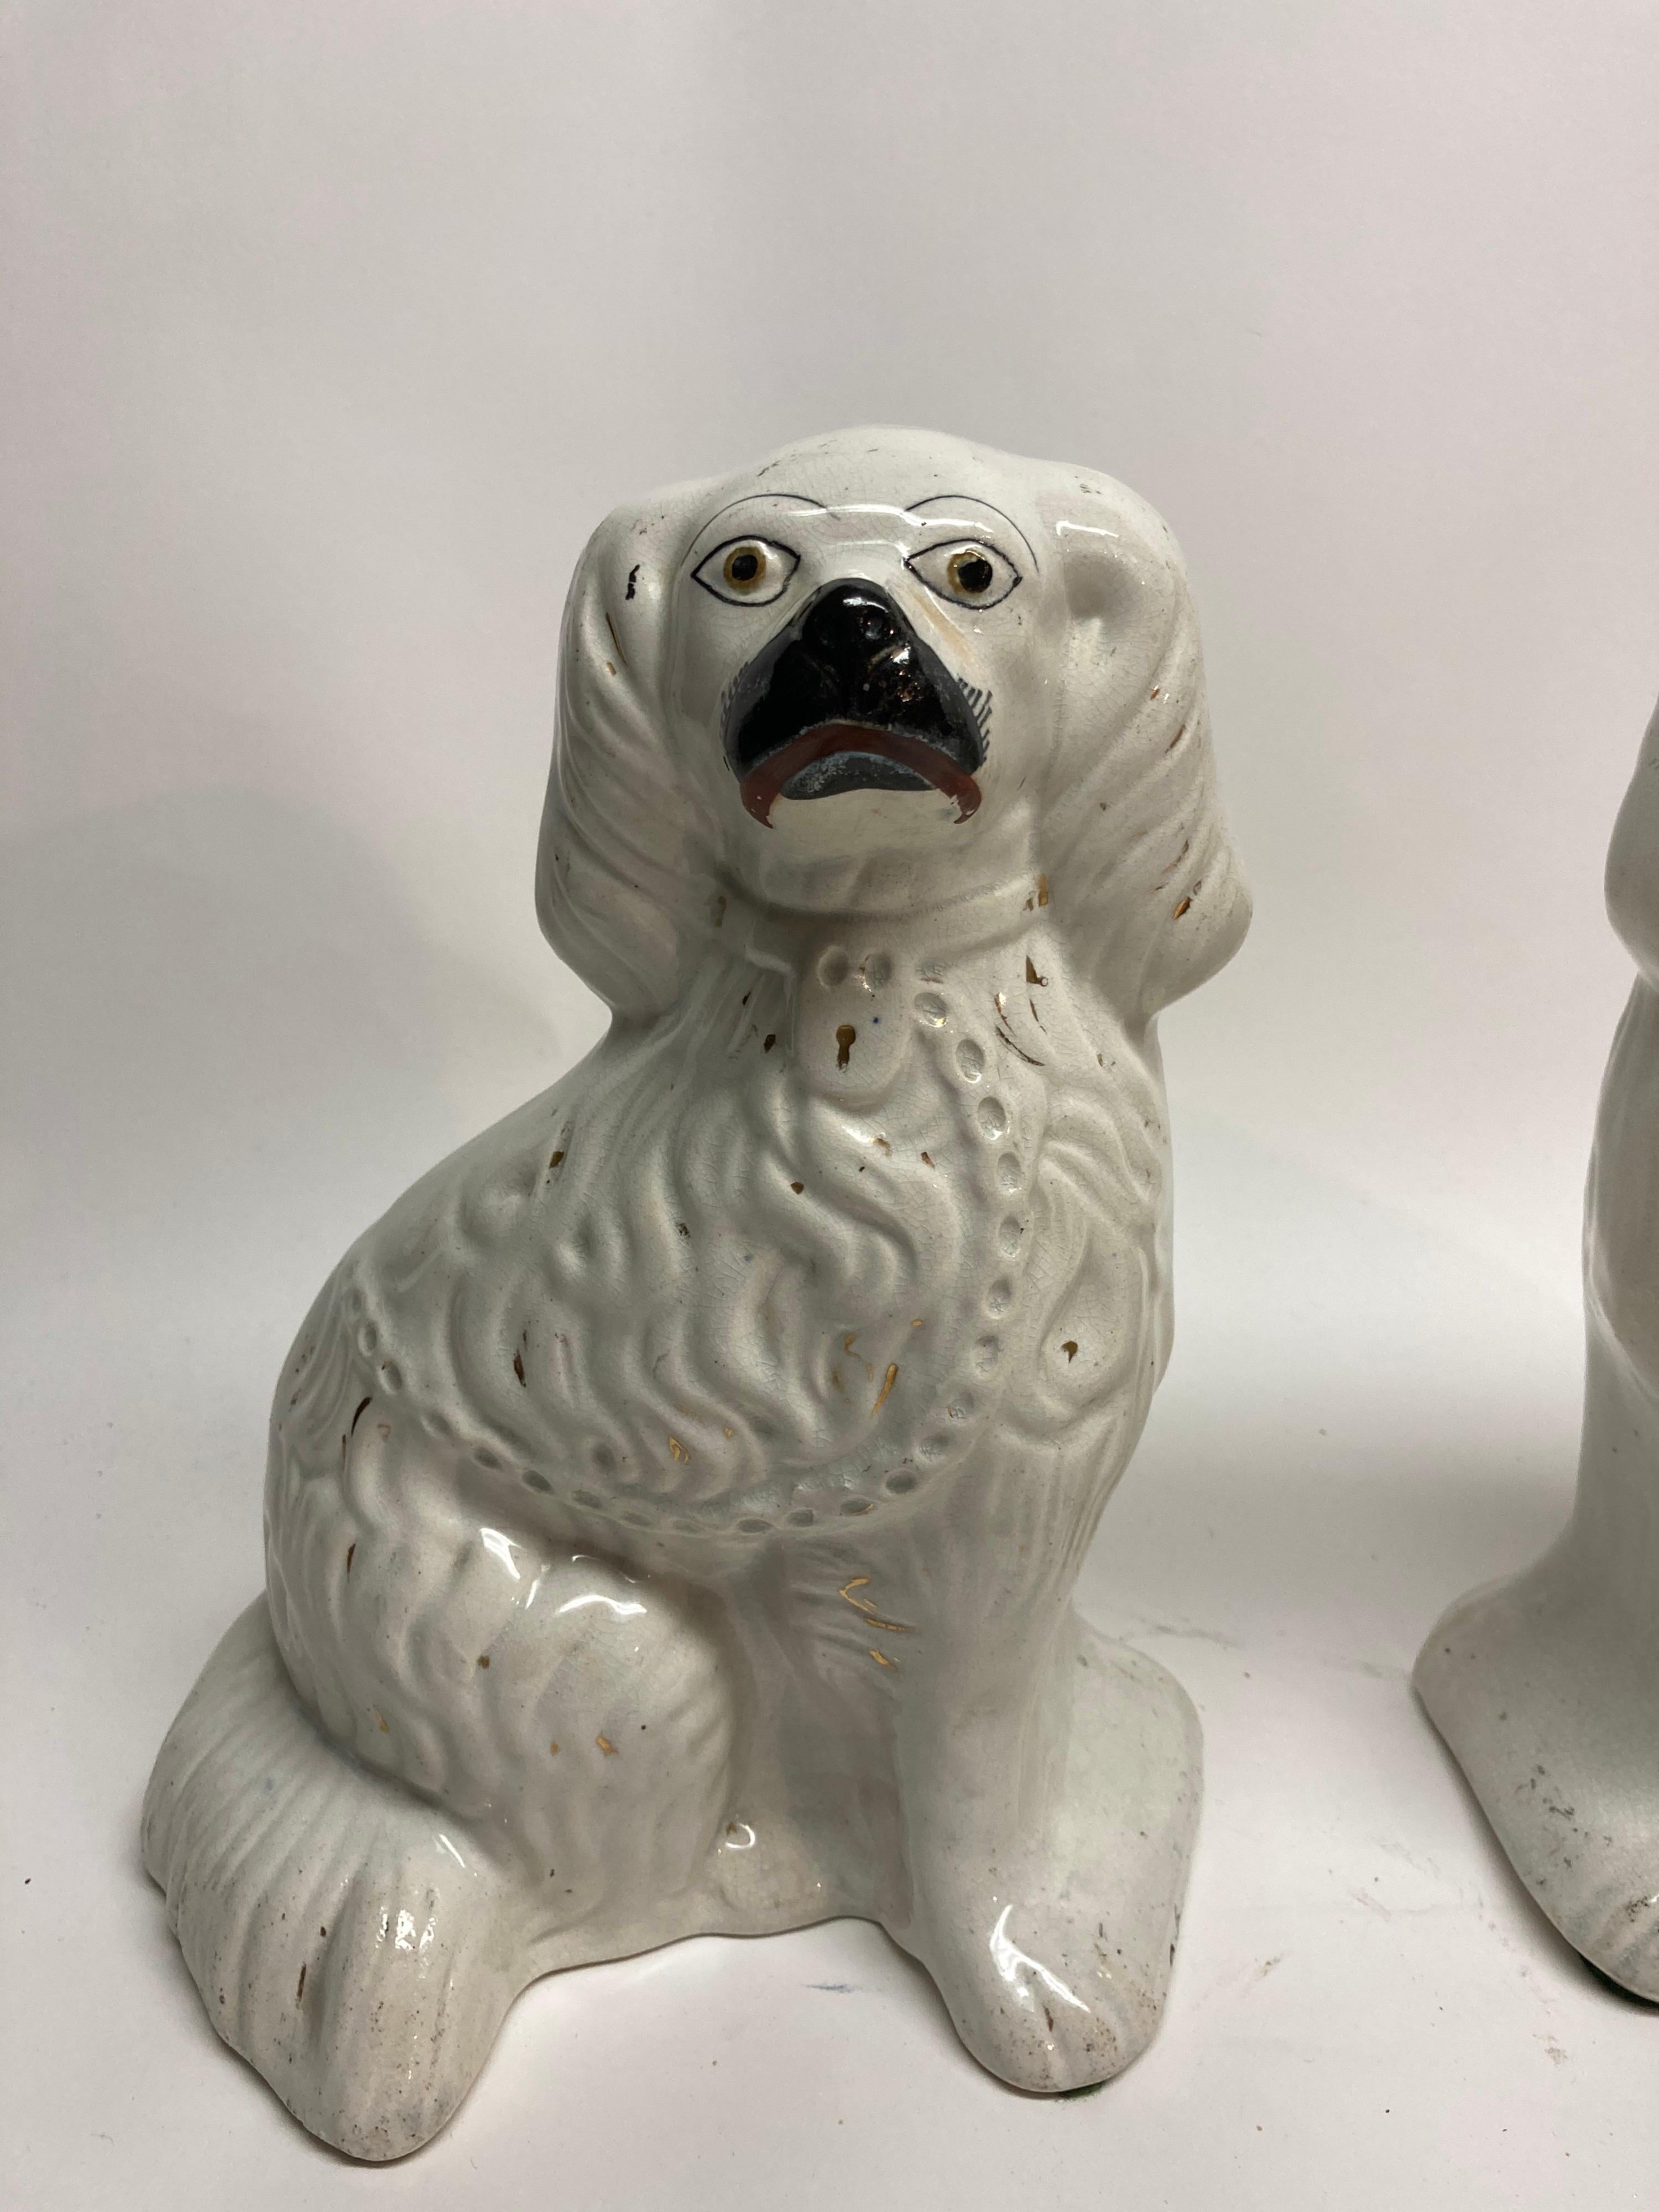 A very nice pair of Staffordshire spaniels.